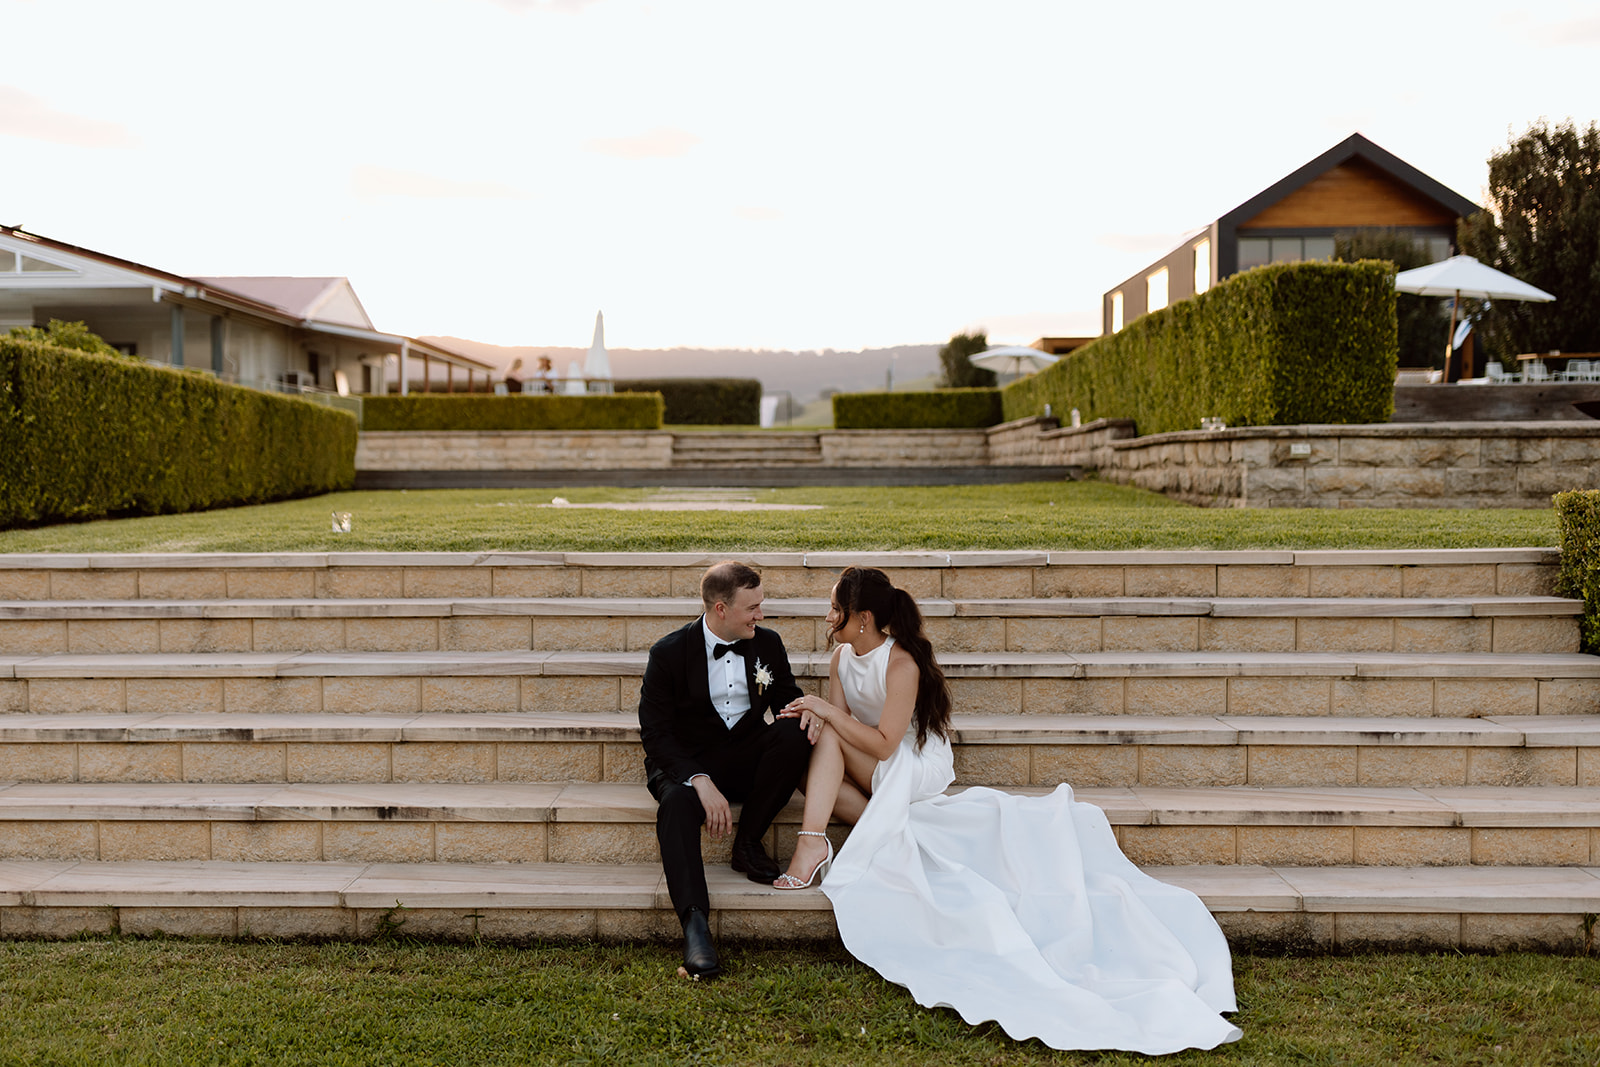 Bridal Portraits at the wedding in the South Coast Seacliff House